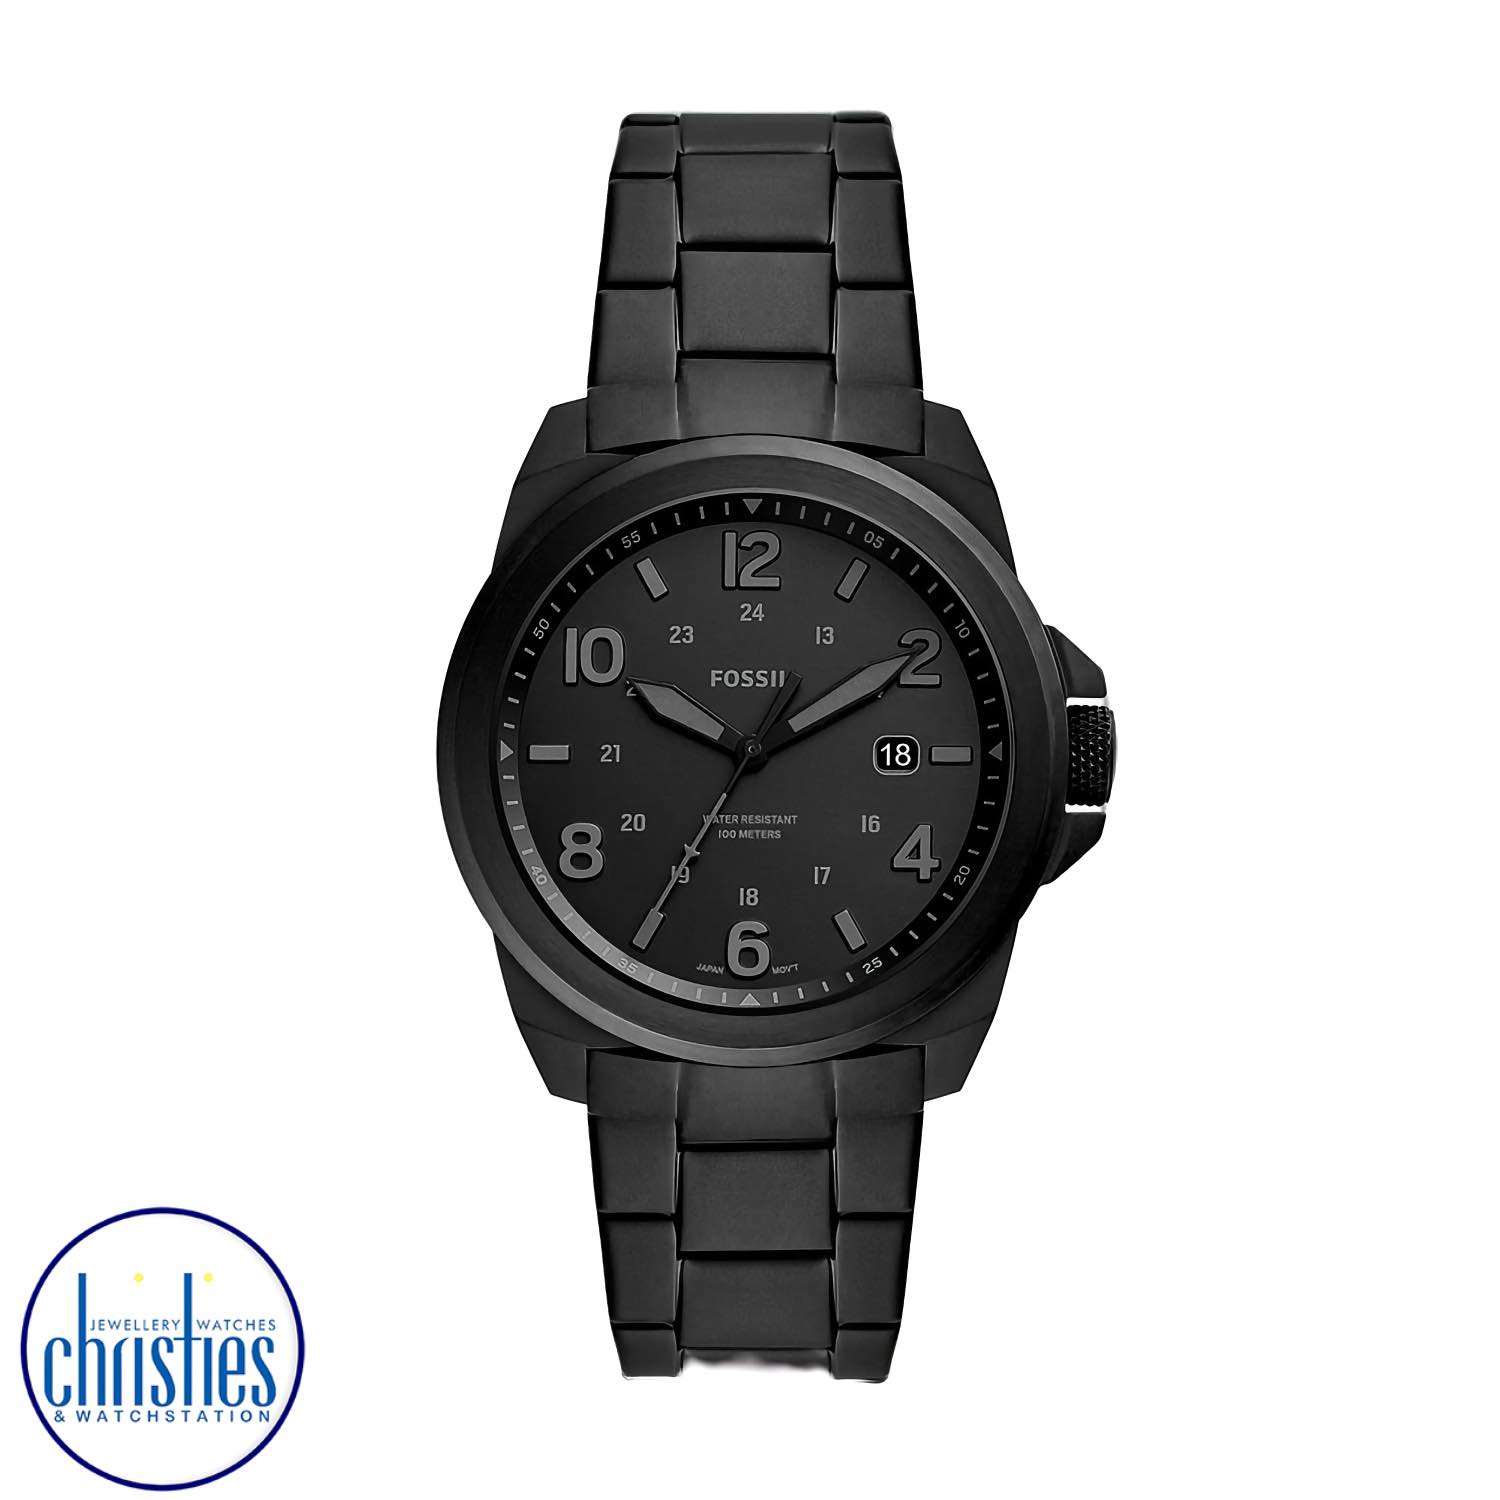 FS5940 Fossil Bronson Three-Hand Date Black Stainless Steel Watch. FS5940 Fossil Bronson Three-Hand Date Black Stainless Steel WatchAfterpay - Split your purchase into 4 instalments - Pay for your purchase over 4 instalments, due every two weeks. fossil m